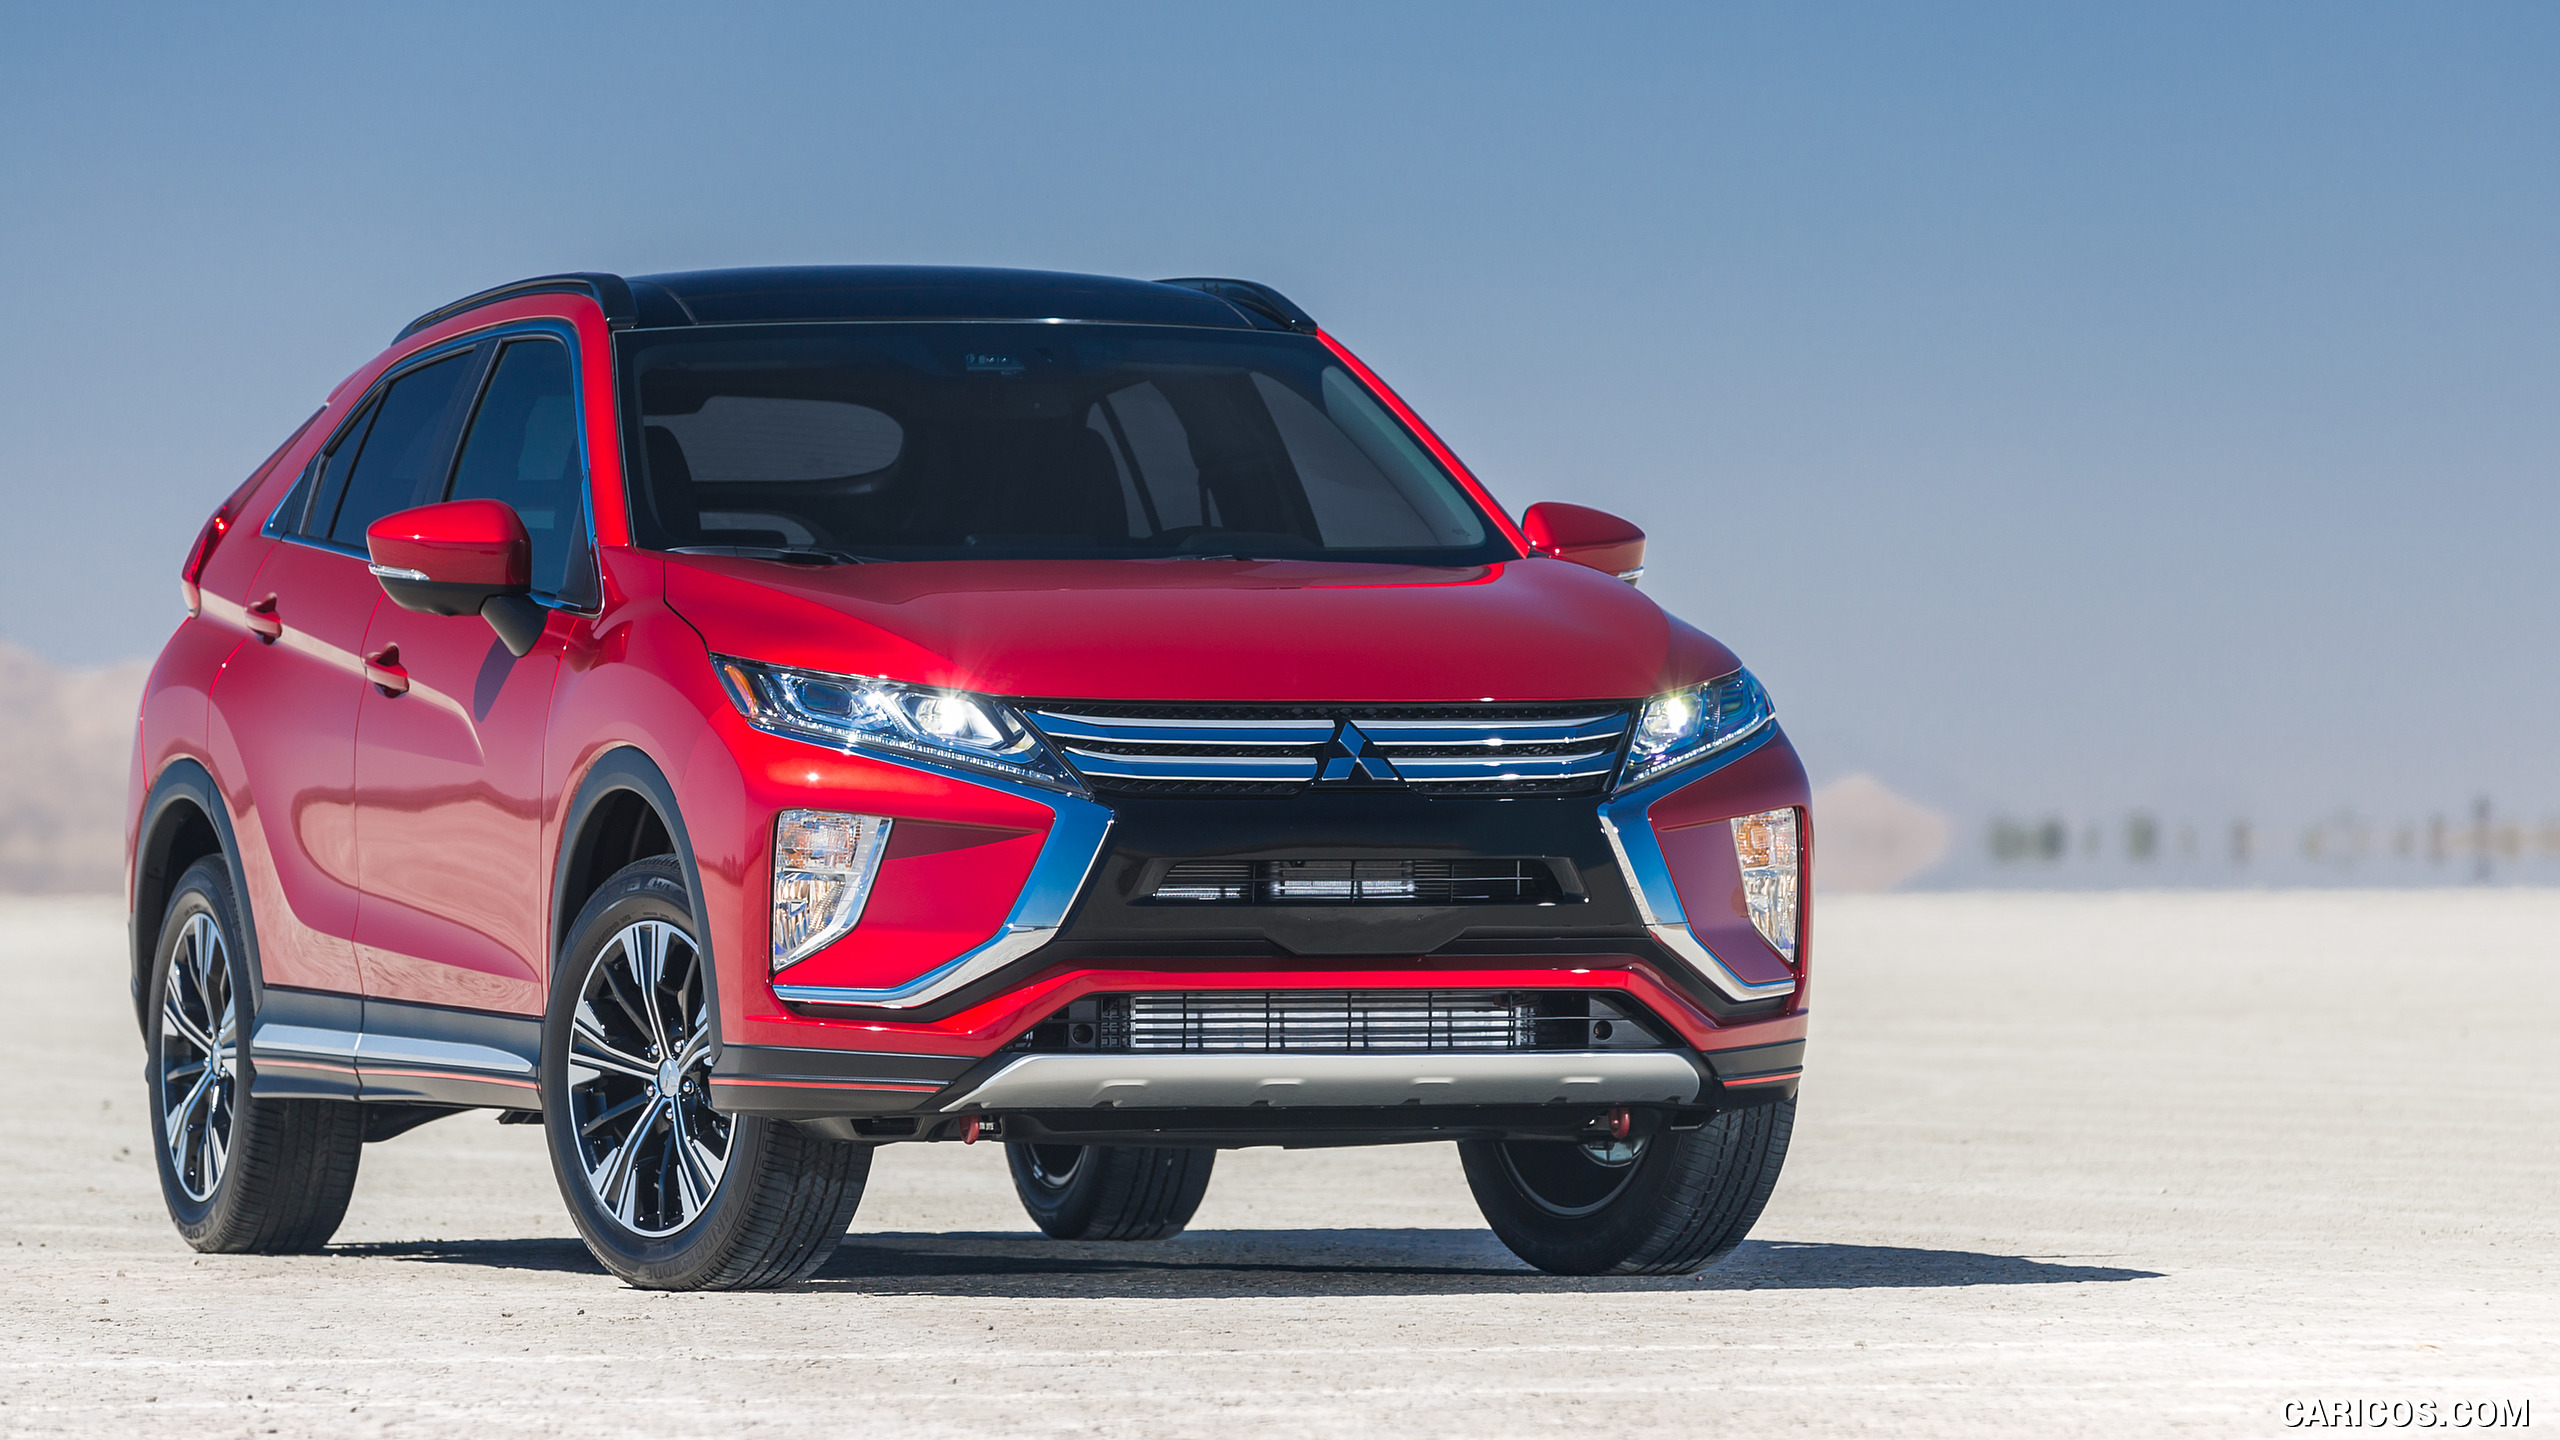 2018 Mitsubishi Eclipse Cross - Front, #3 of 173